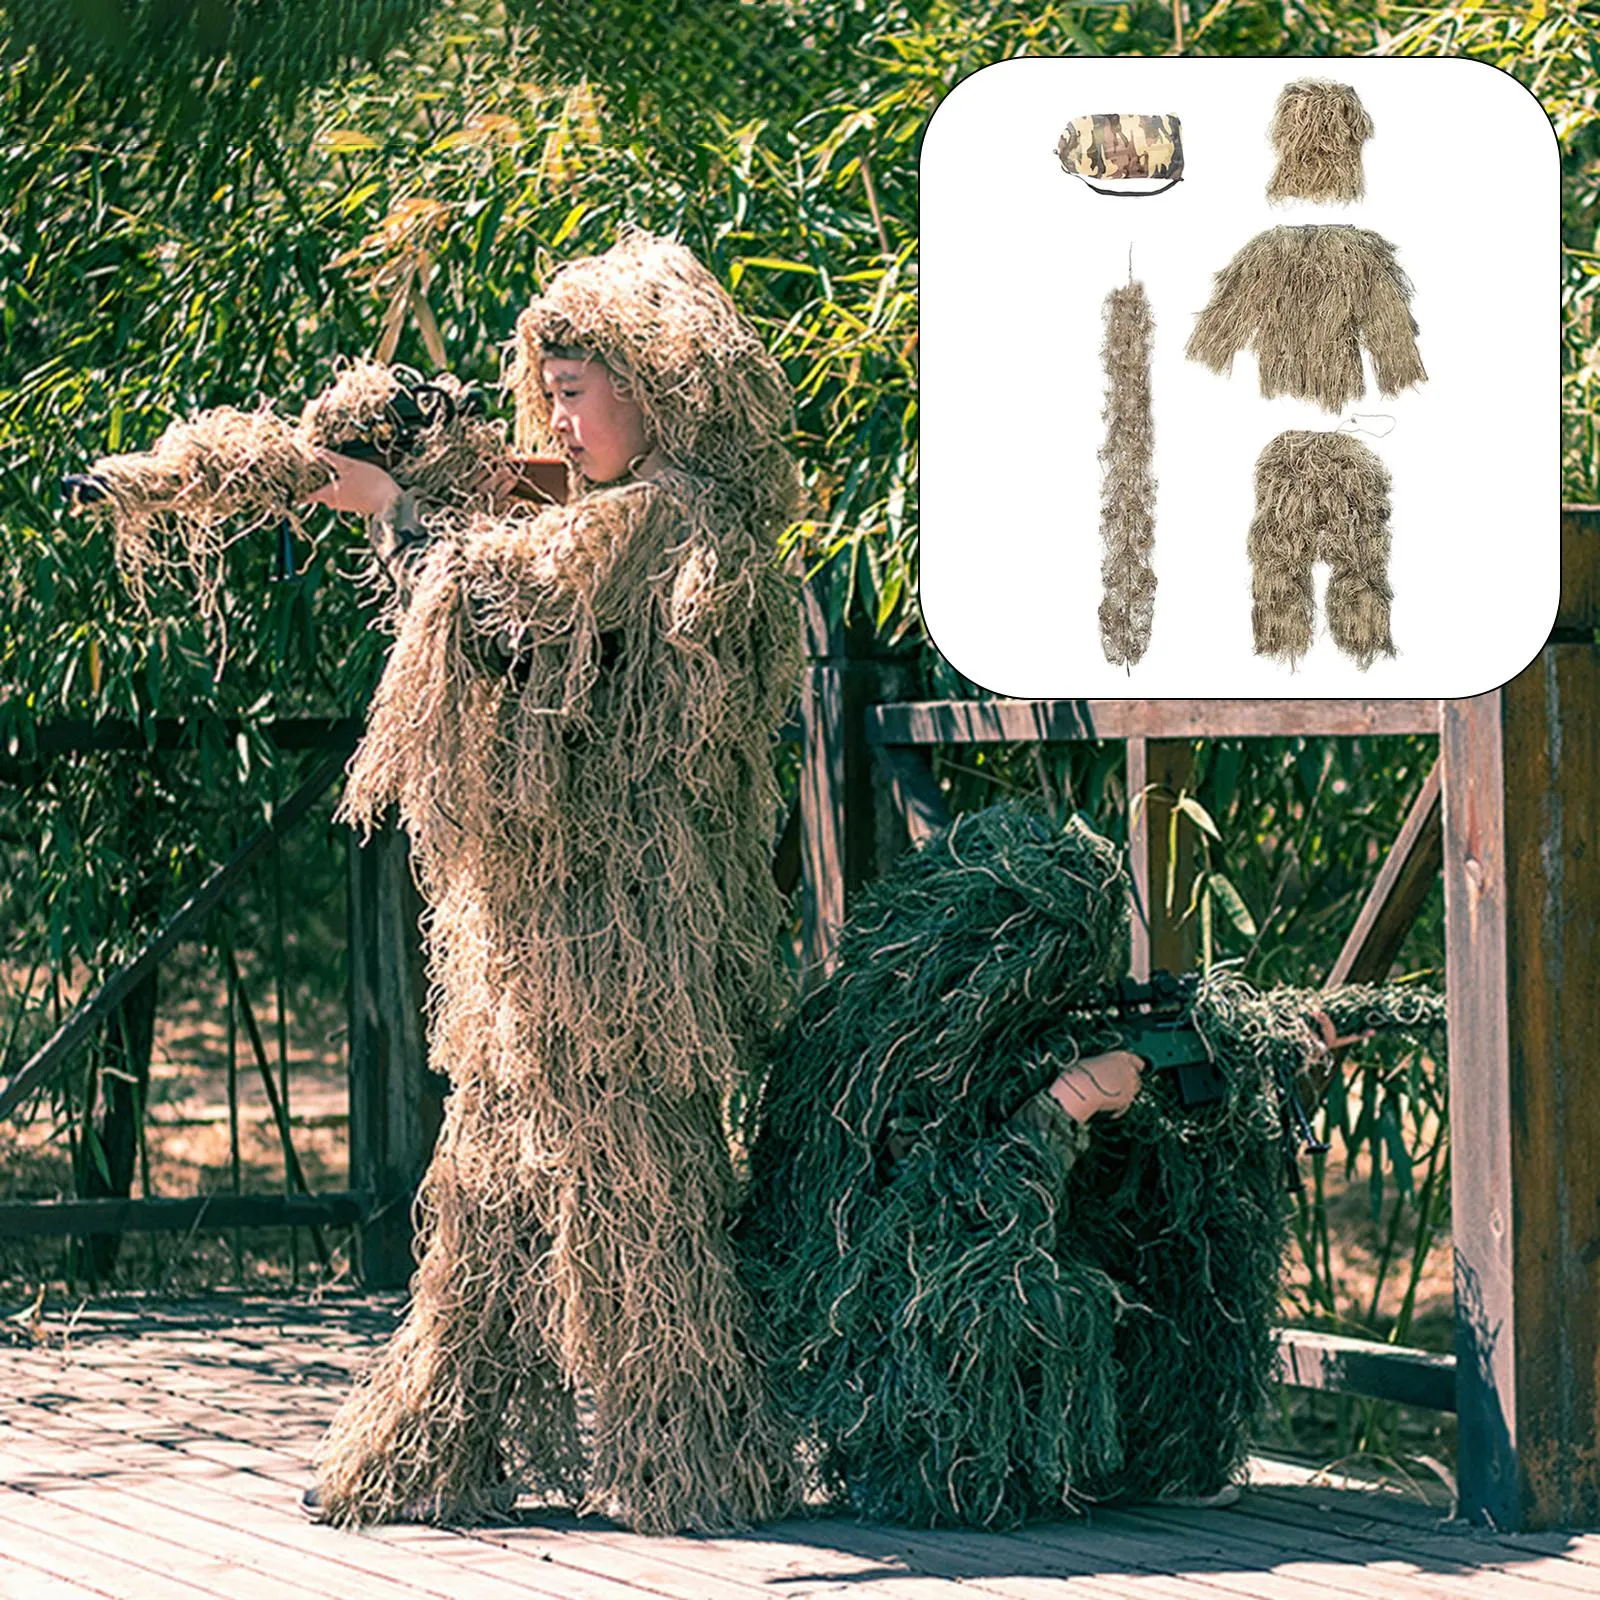 Children Ghillie Suit 3D Camouflage Clothing Woodland Gilly Suit Hunting Clothes Set for Wildlife Photography Clothing Suit